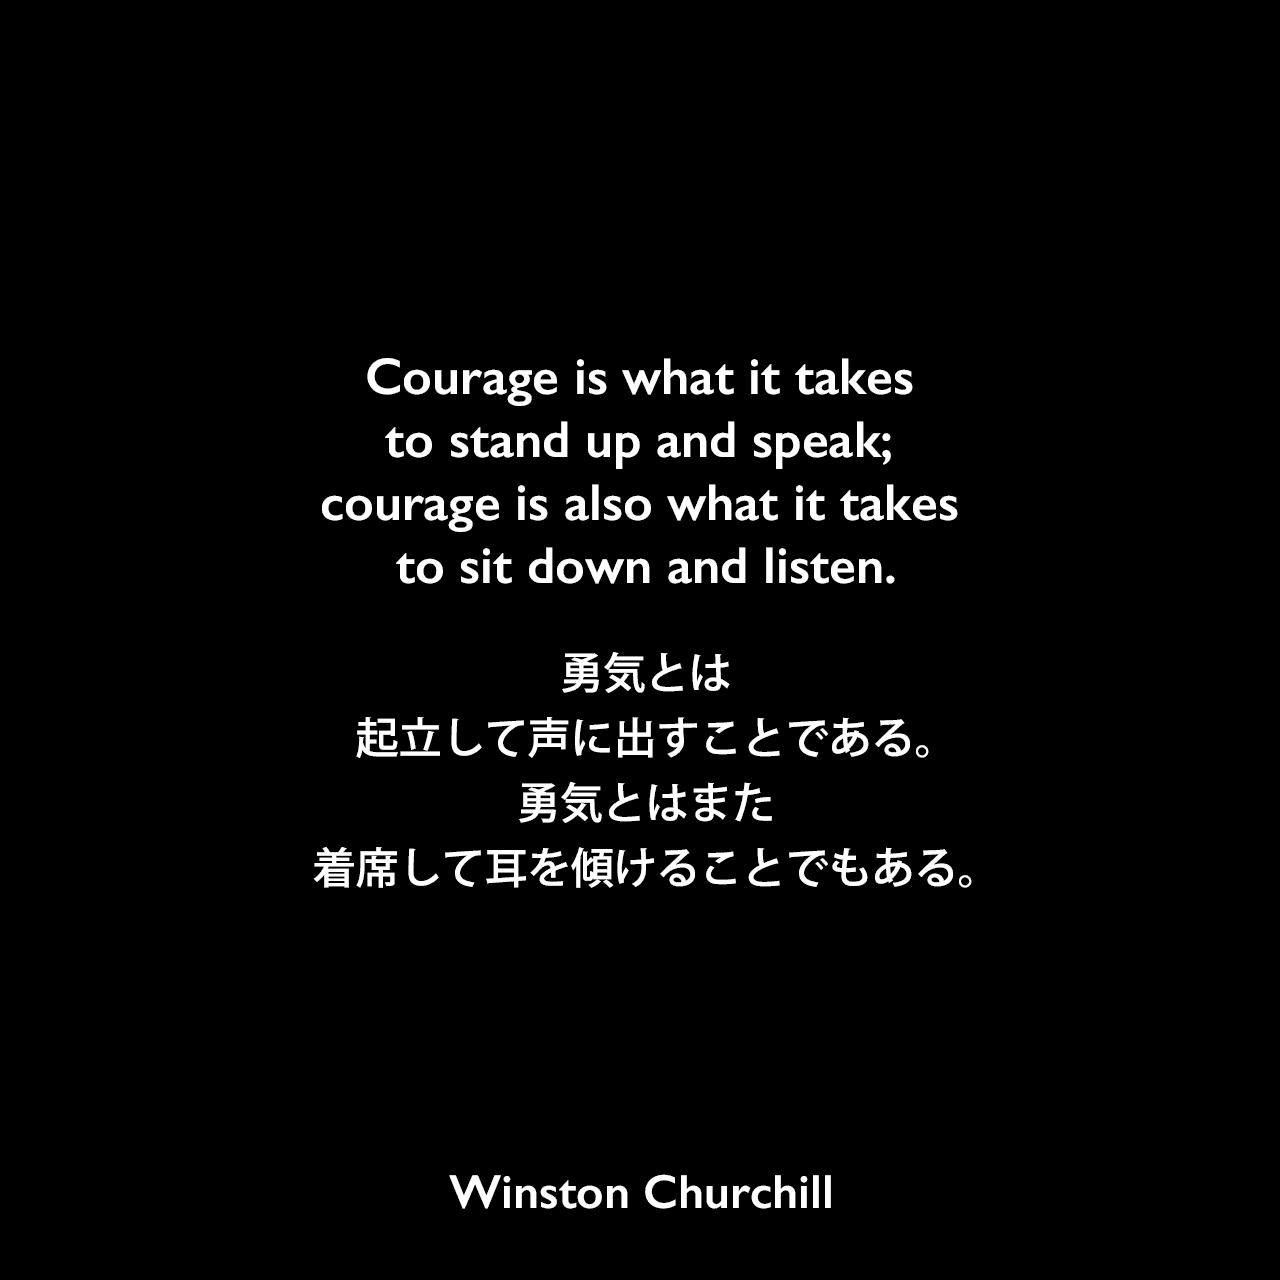 Courage is what it takes to stand up and speak; courage is also what it takes to sit down and listen.勇気とは、起立して声に出すことである。勇気とはまた、着席して耳を傾けることでもある。Winston Churchill